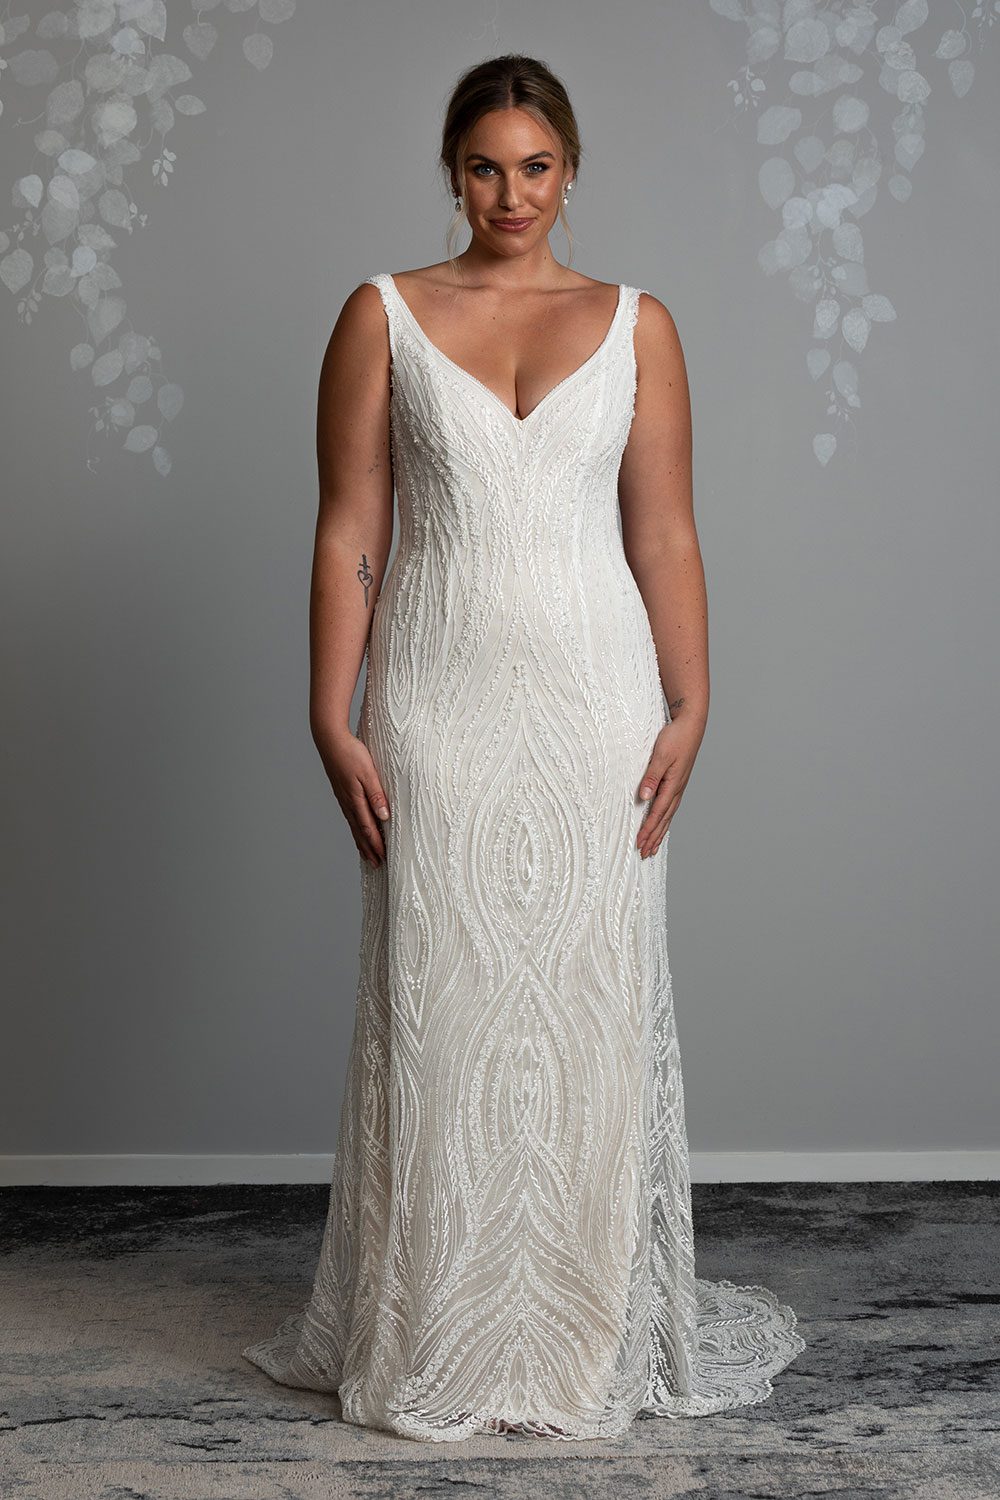 Kiera Wedding Dress from Vinka Design. Beautifully beaded lace wedding dress. Deep V-neckline both front and back is complemented with delicate sheer lace shoulder detail & structured bodice. Full length view of gown with deep V-neckline and delicate beaded lace